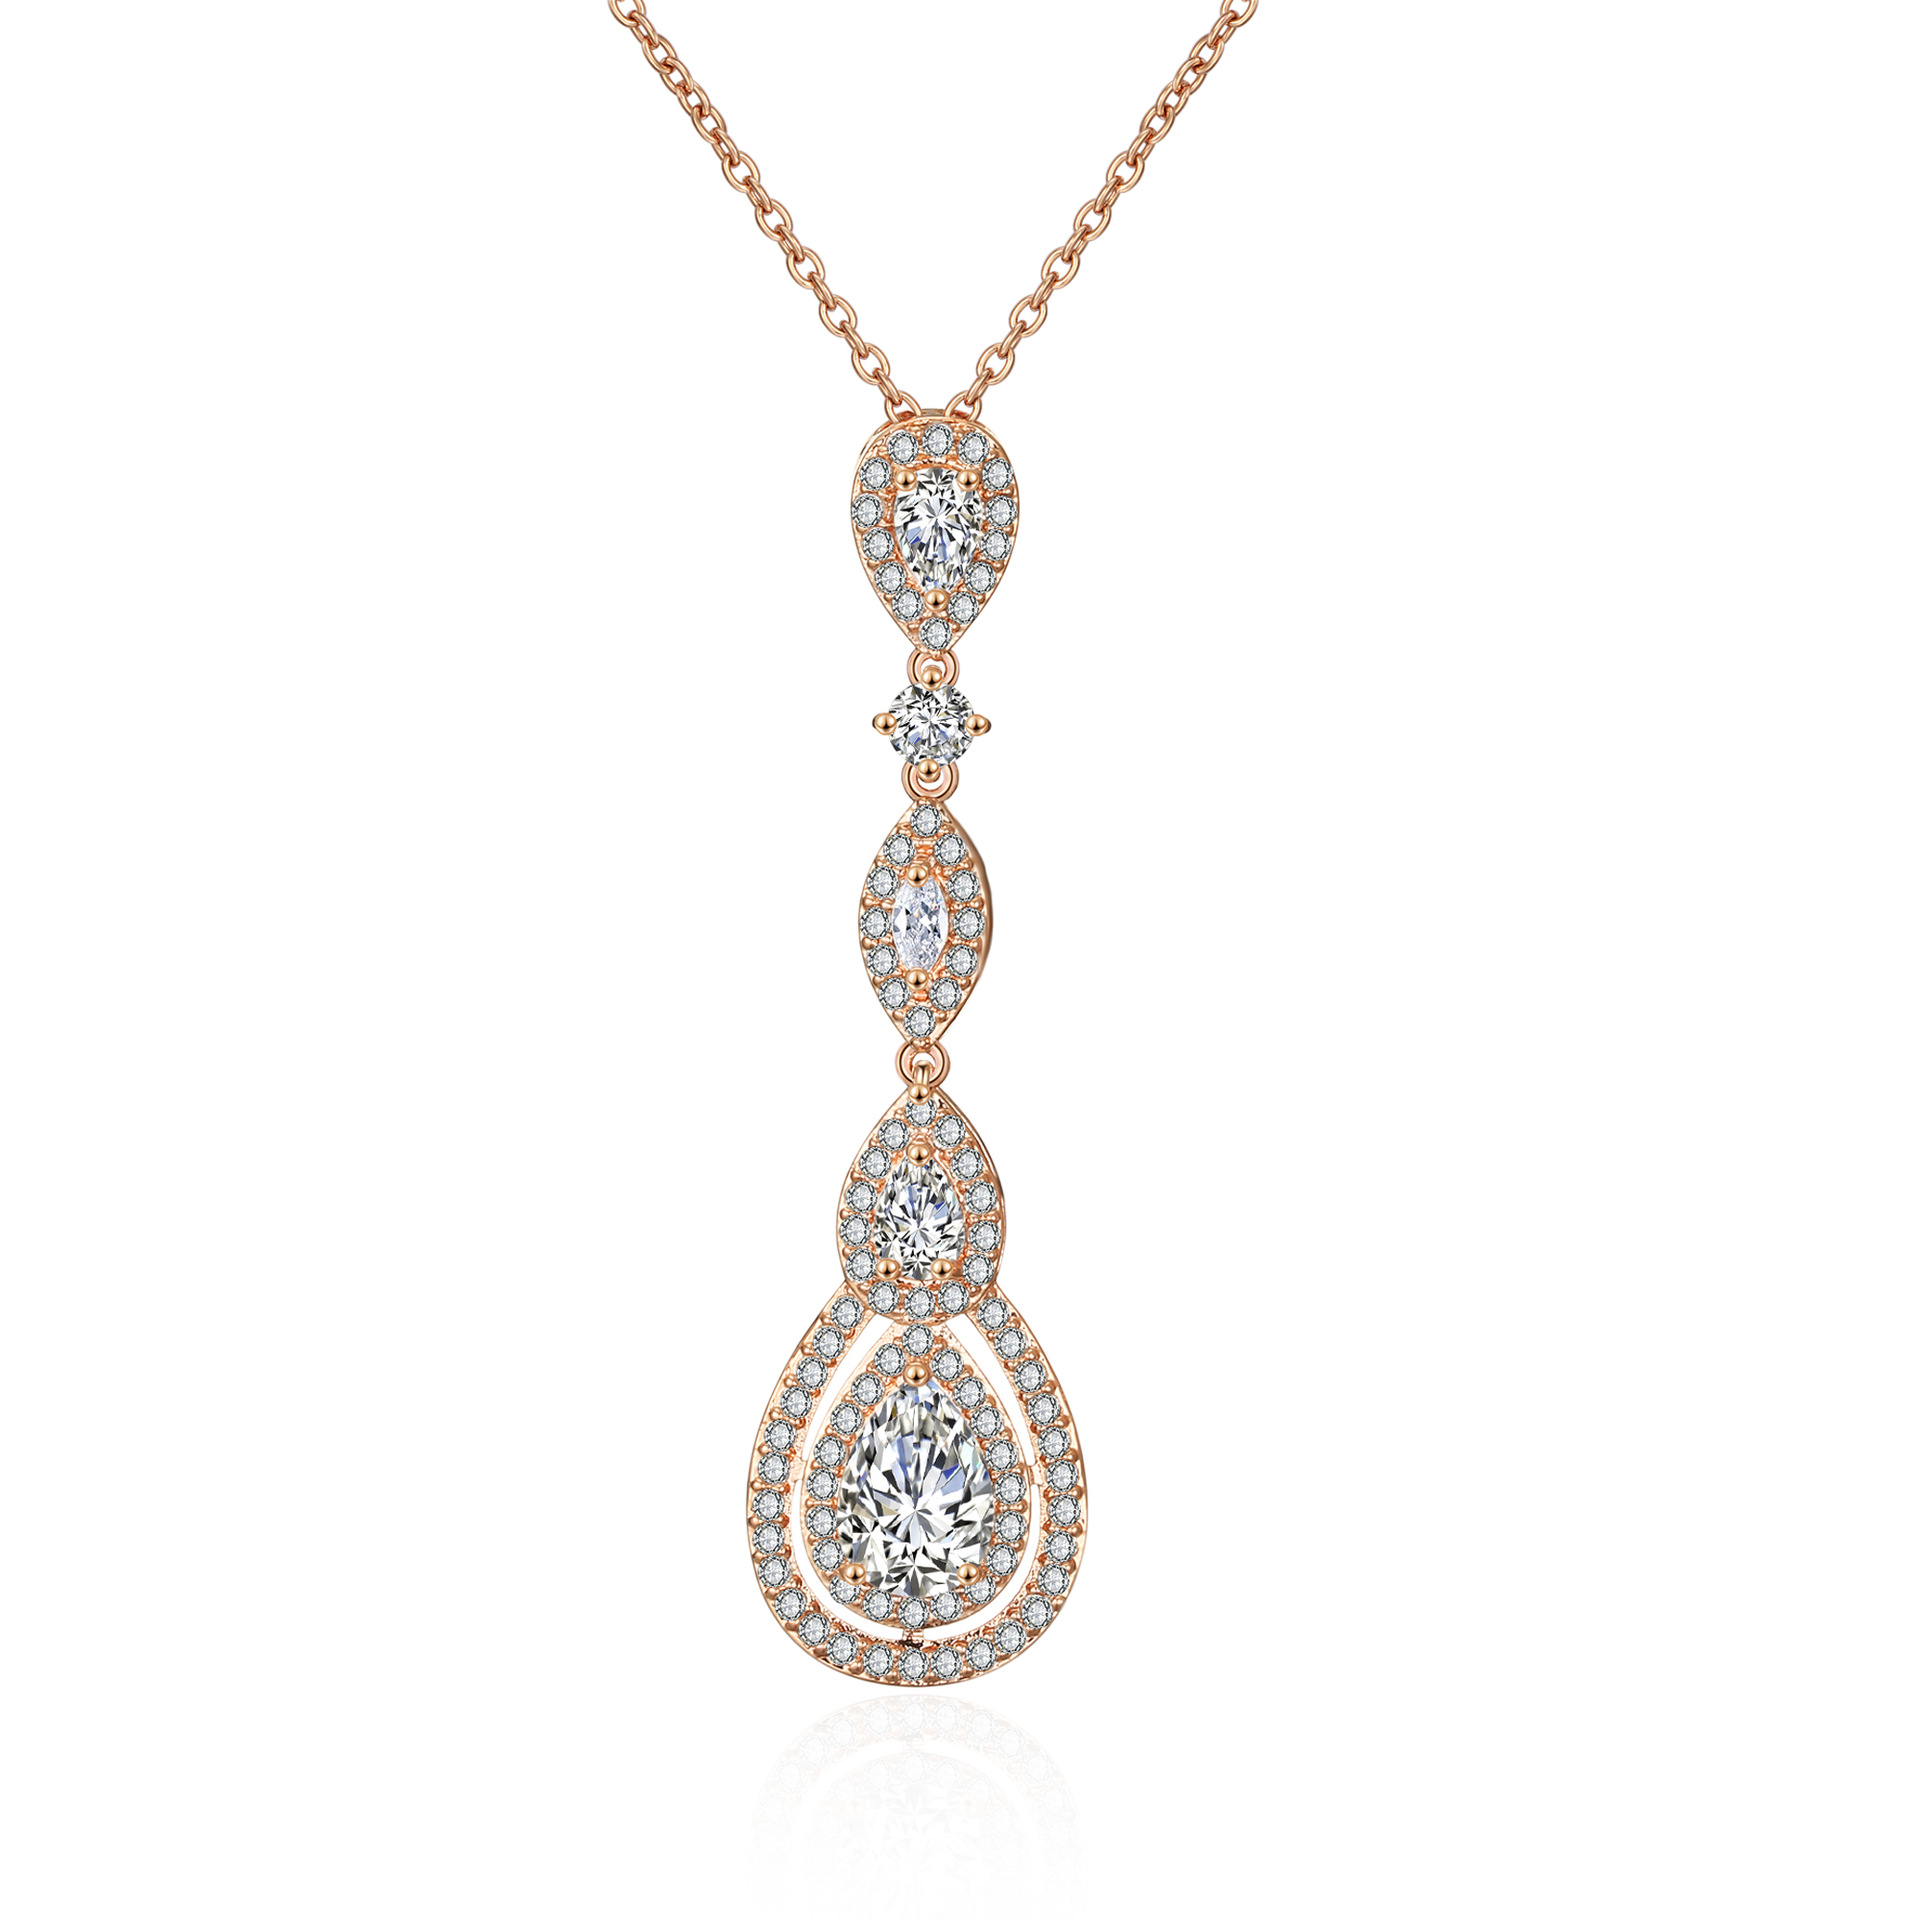 6:Necklace rose gold color plated